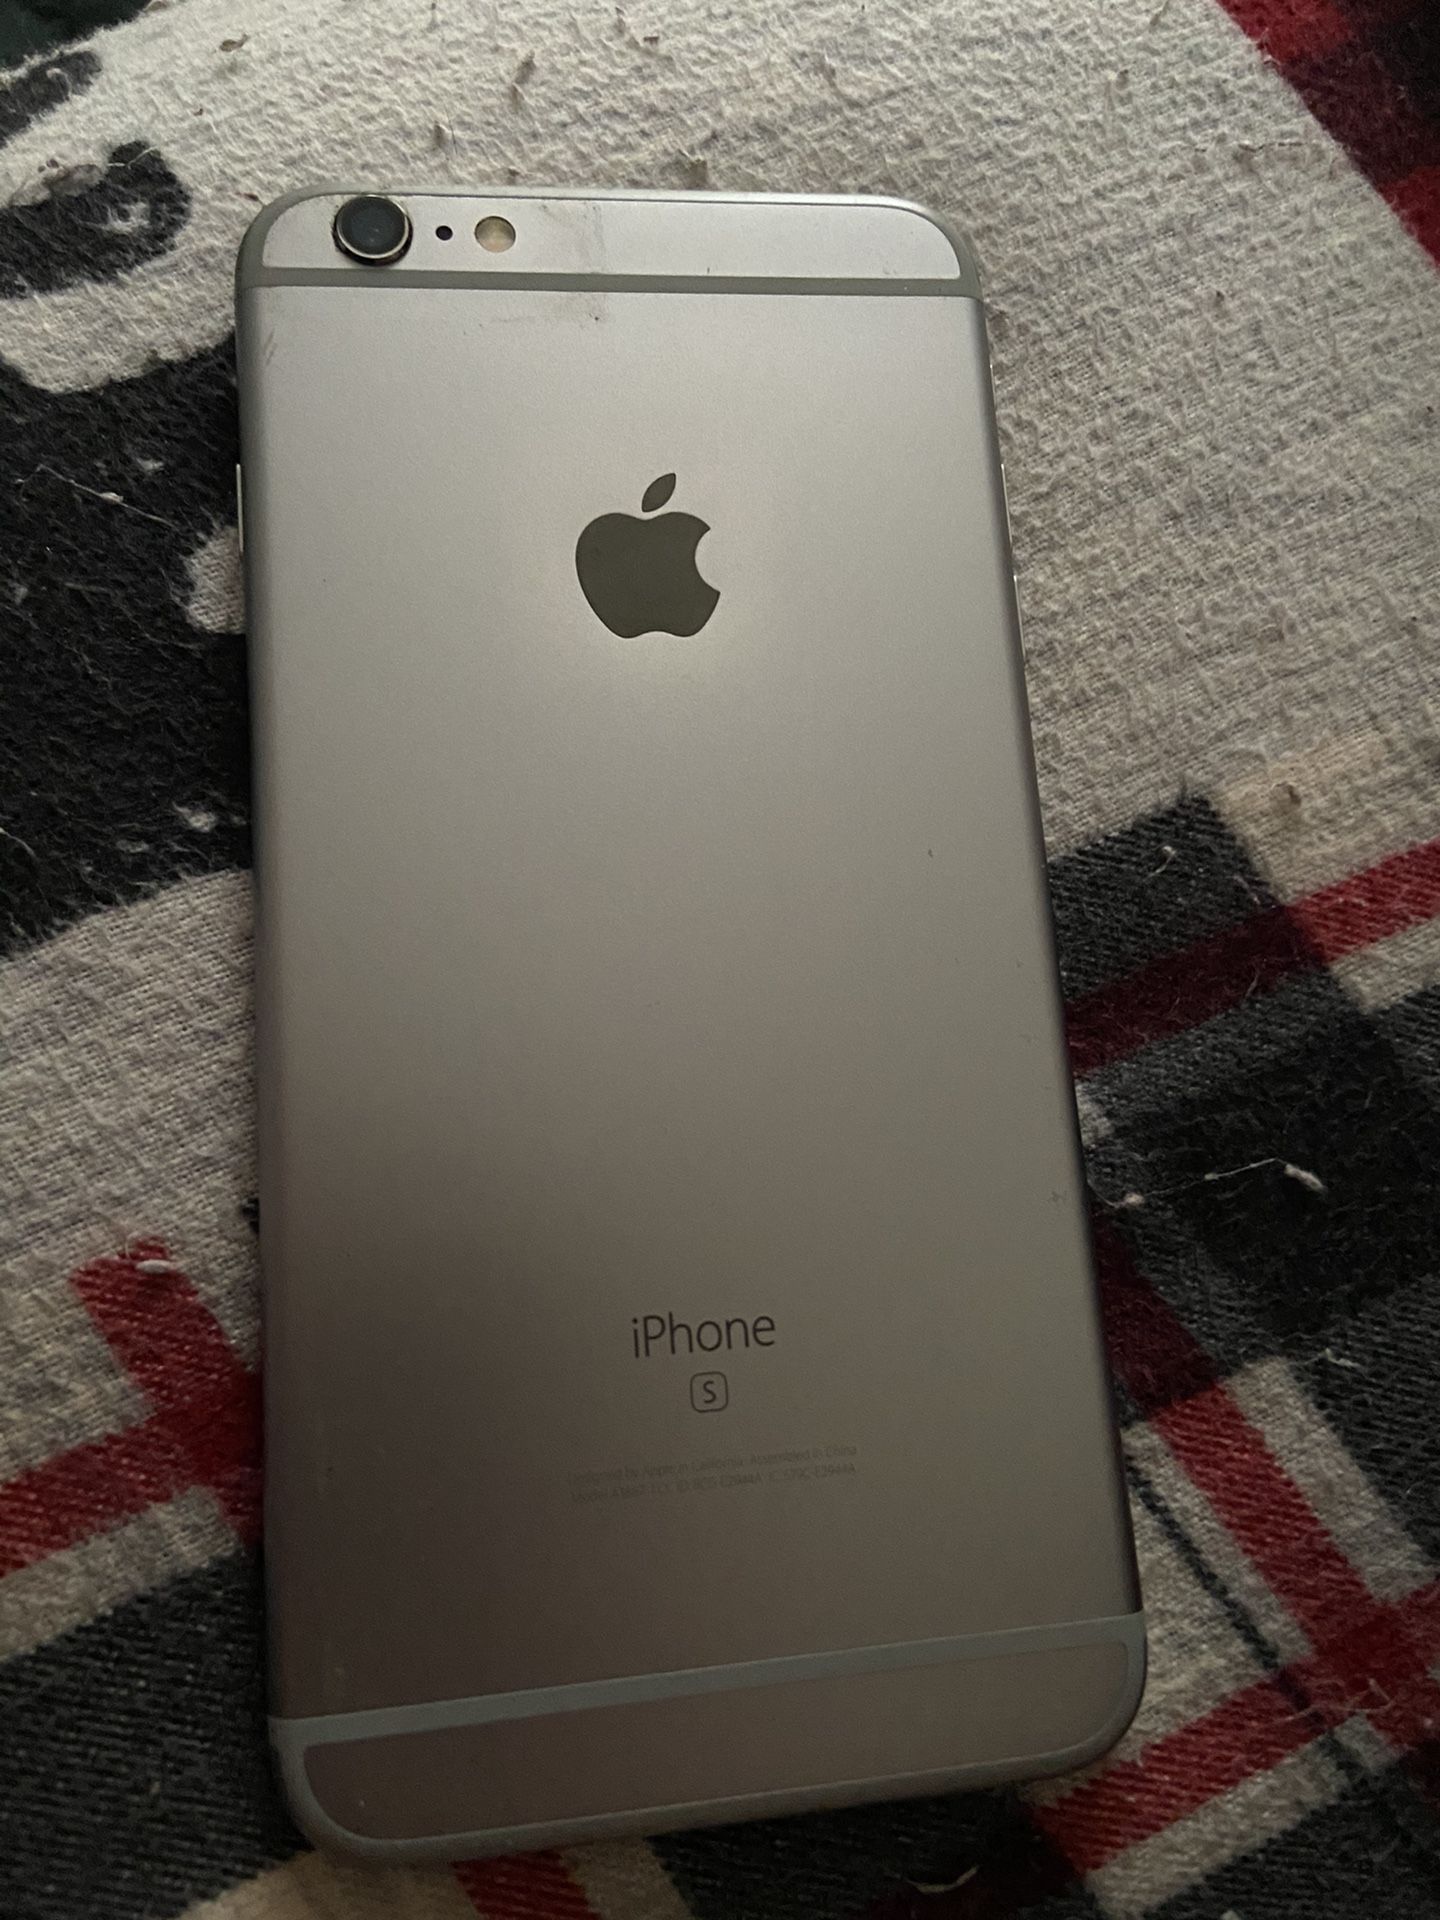 iPhone 6s Plus boost mobile